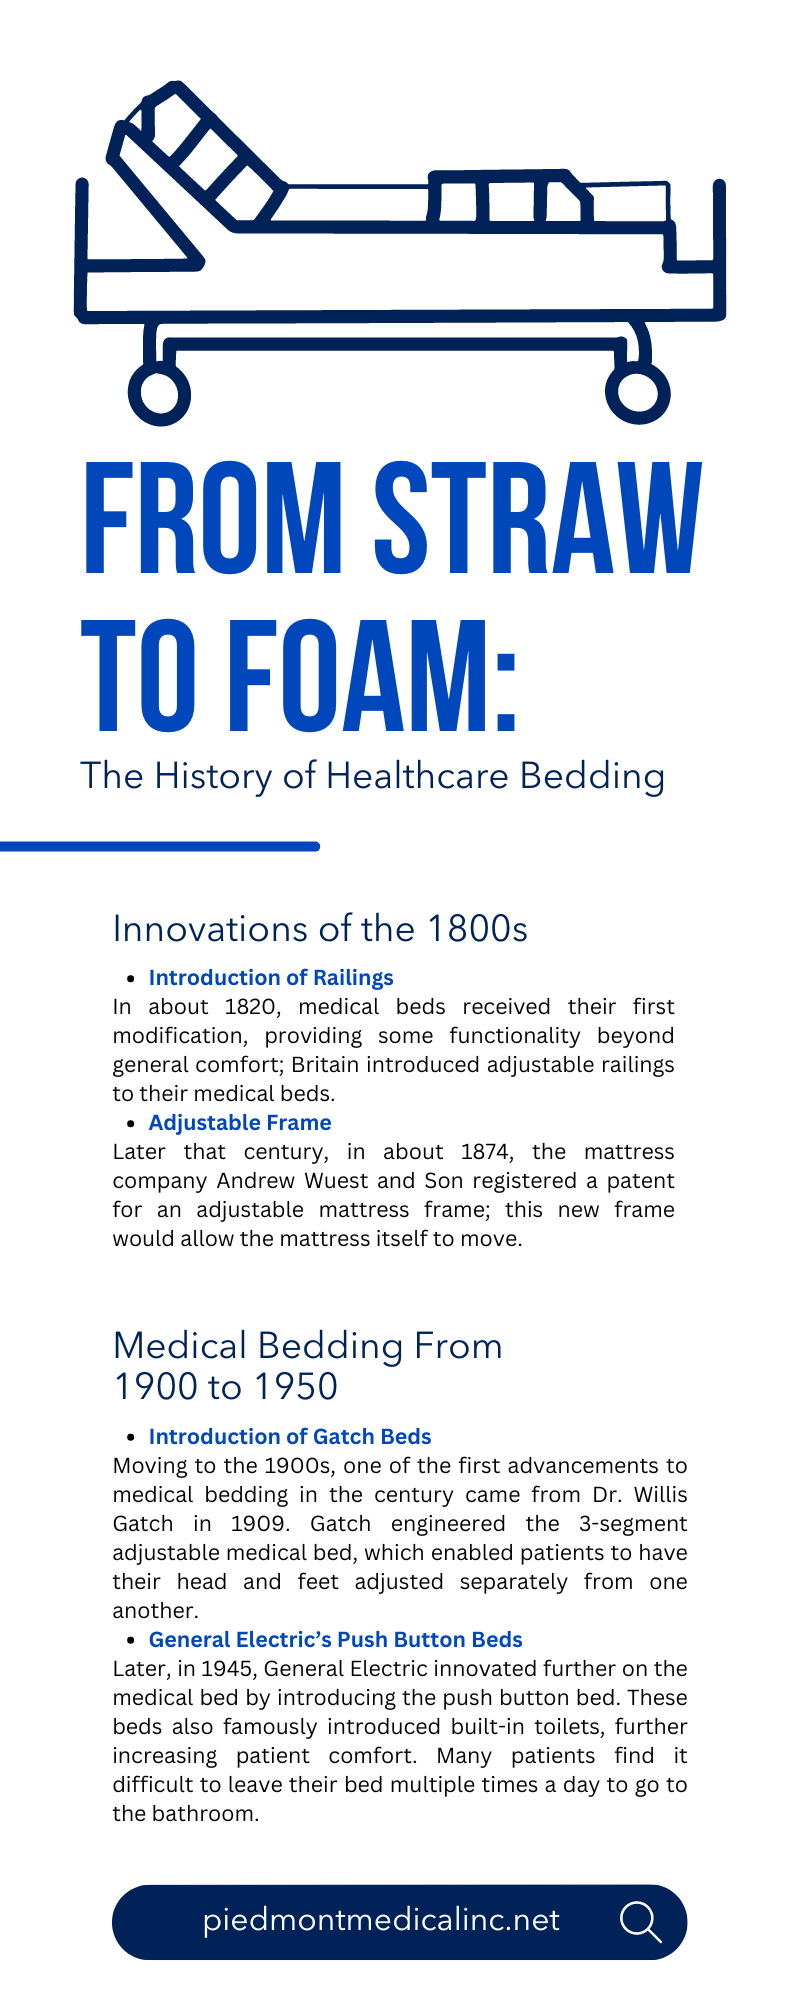 From Straw to Foam: The History of Healthcare Bedding